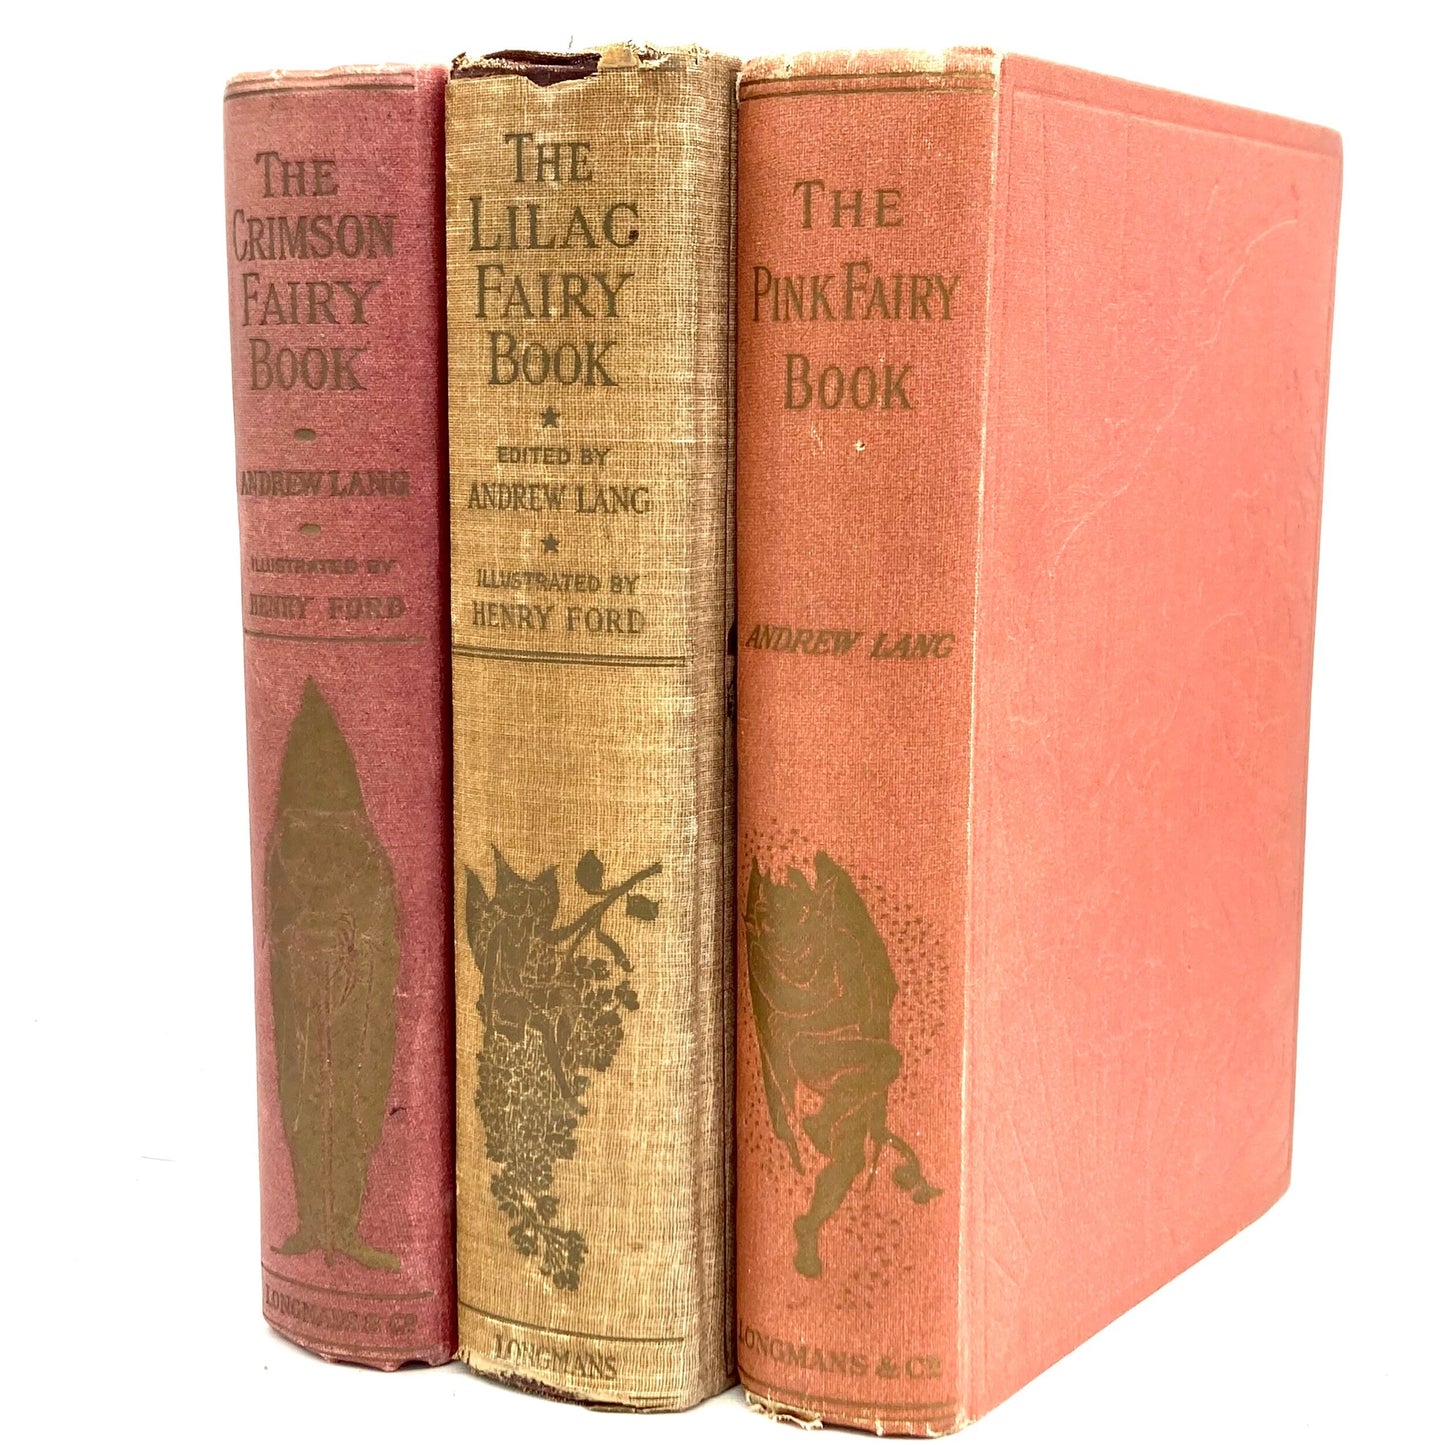 LANG, Andrew - Complete Set of 12 "Fairy Books" [Longmans, Green & Co, 1914-1925] - Buzz Bookstore